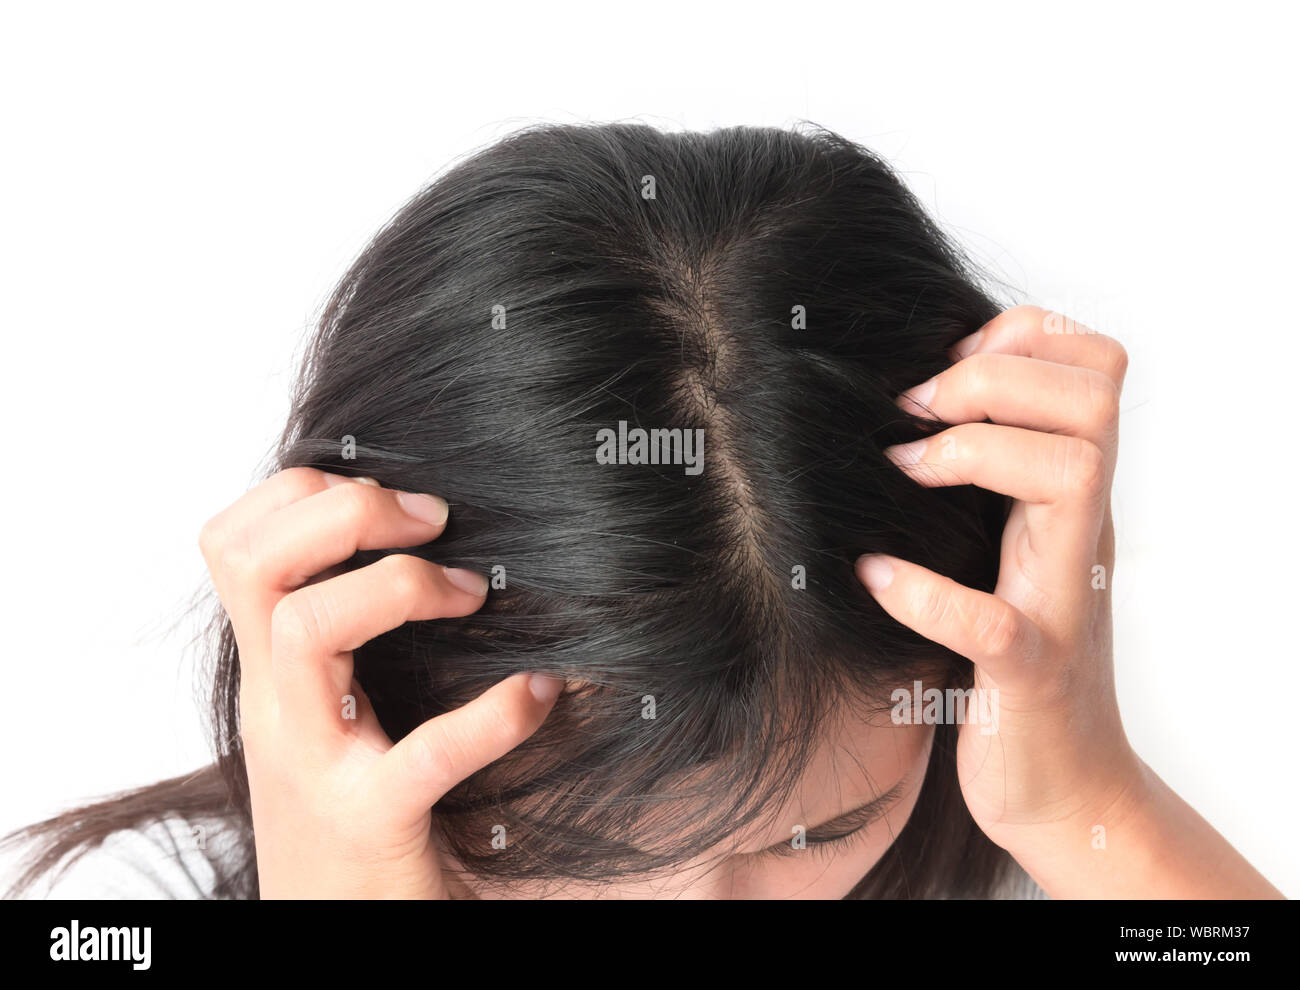 Woman Scratching Head Against White Background Stock Photo